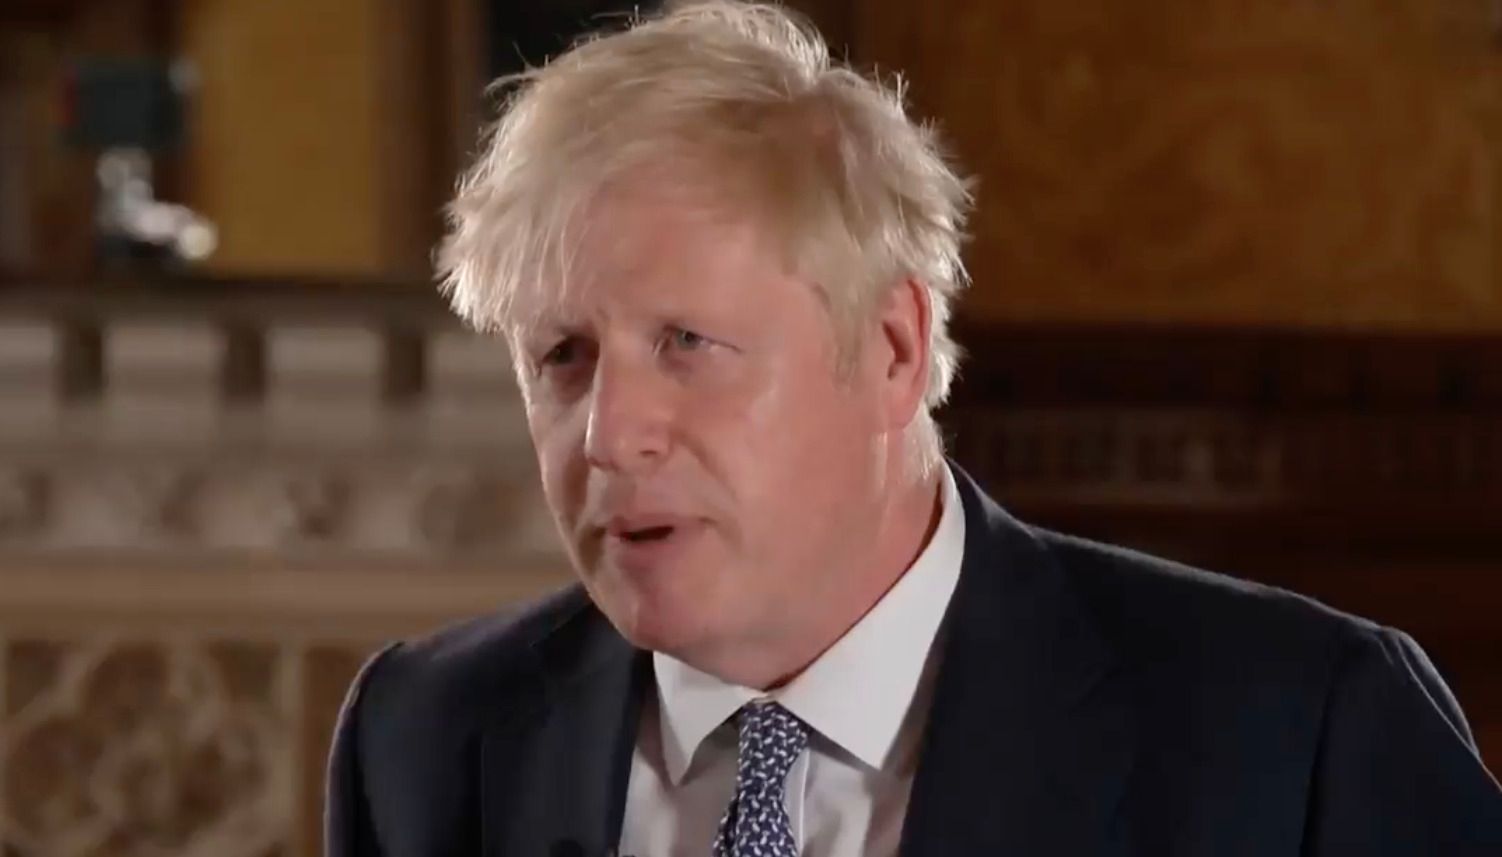 Boris Johnson faces a pivotal moment in his premiership as two key figures in the Cabinet resigned.